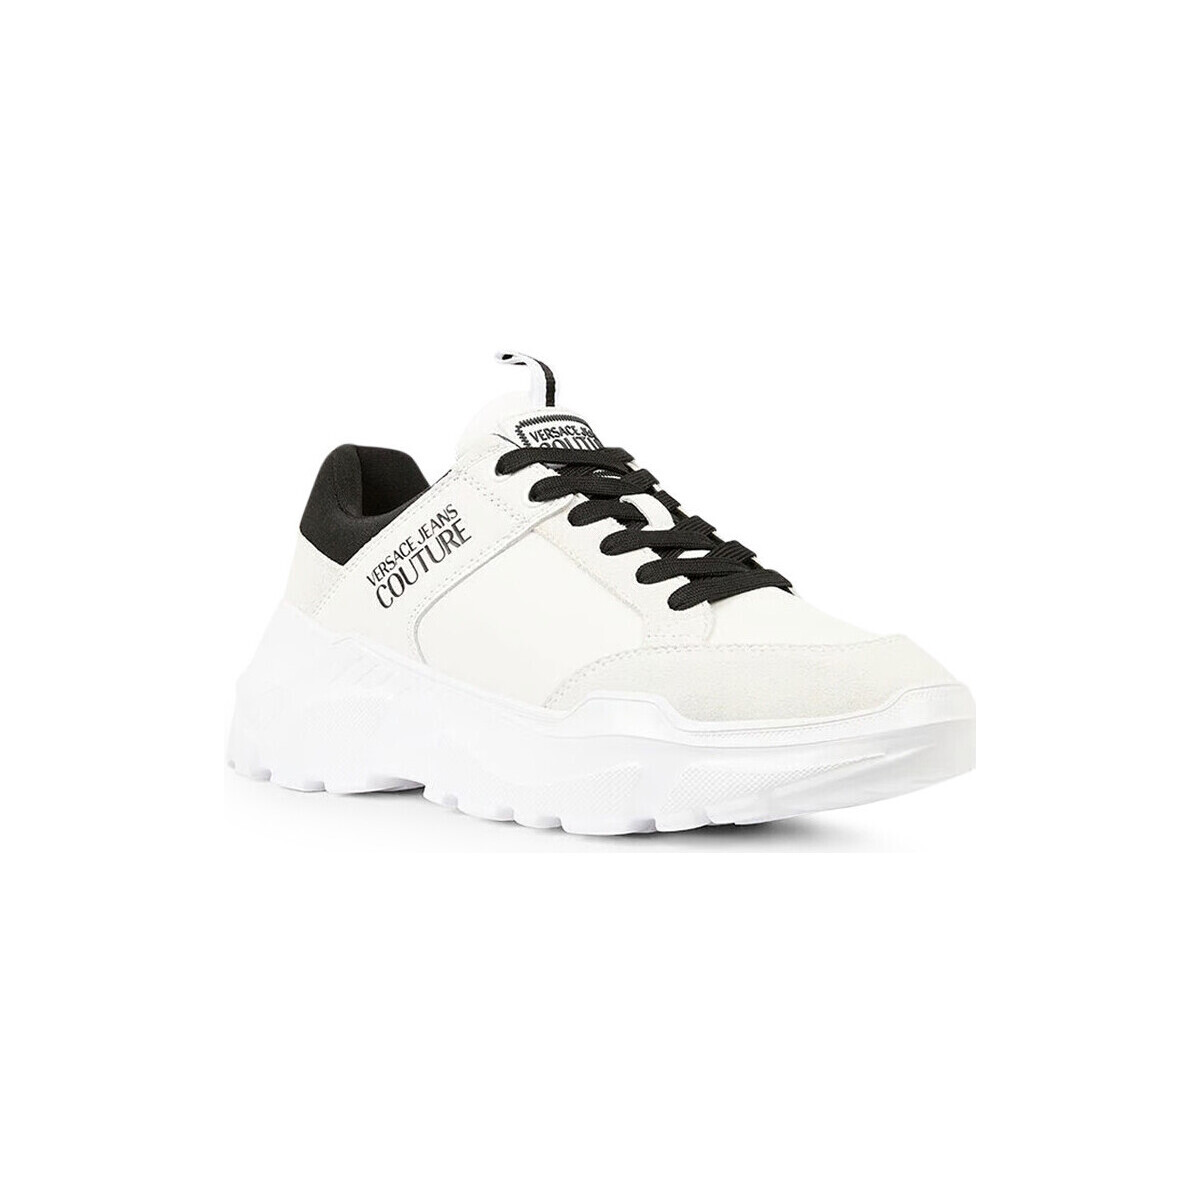 Versace Jeans Couture Blanc Sneakers Blanc HyMGVamG